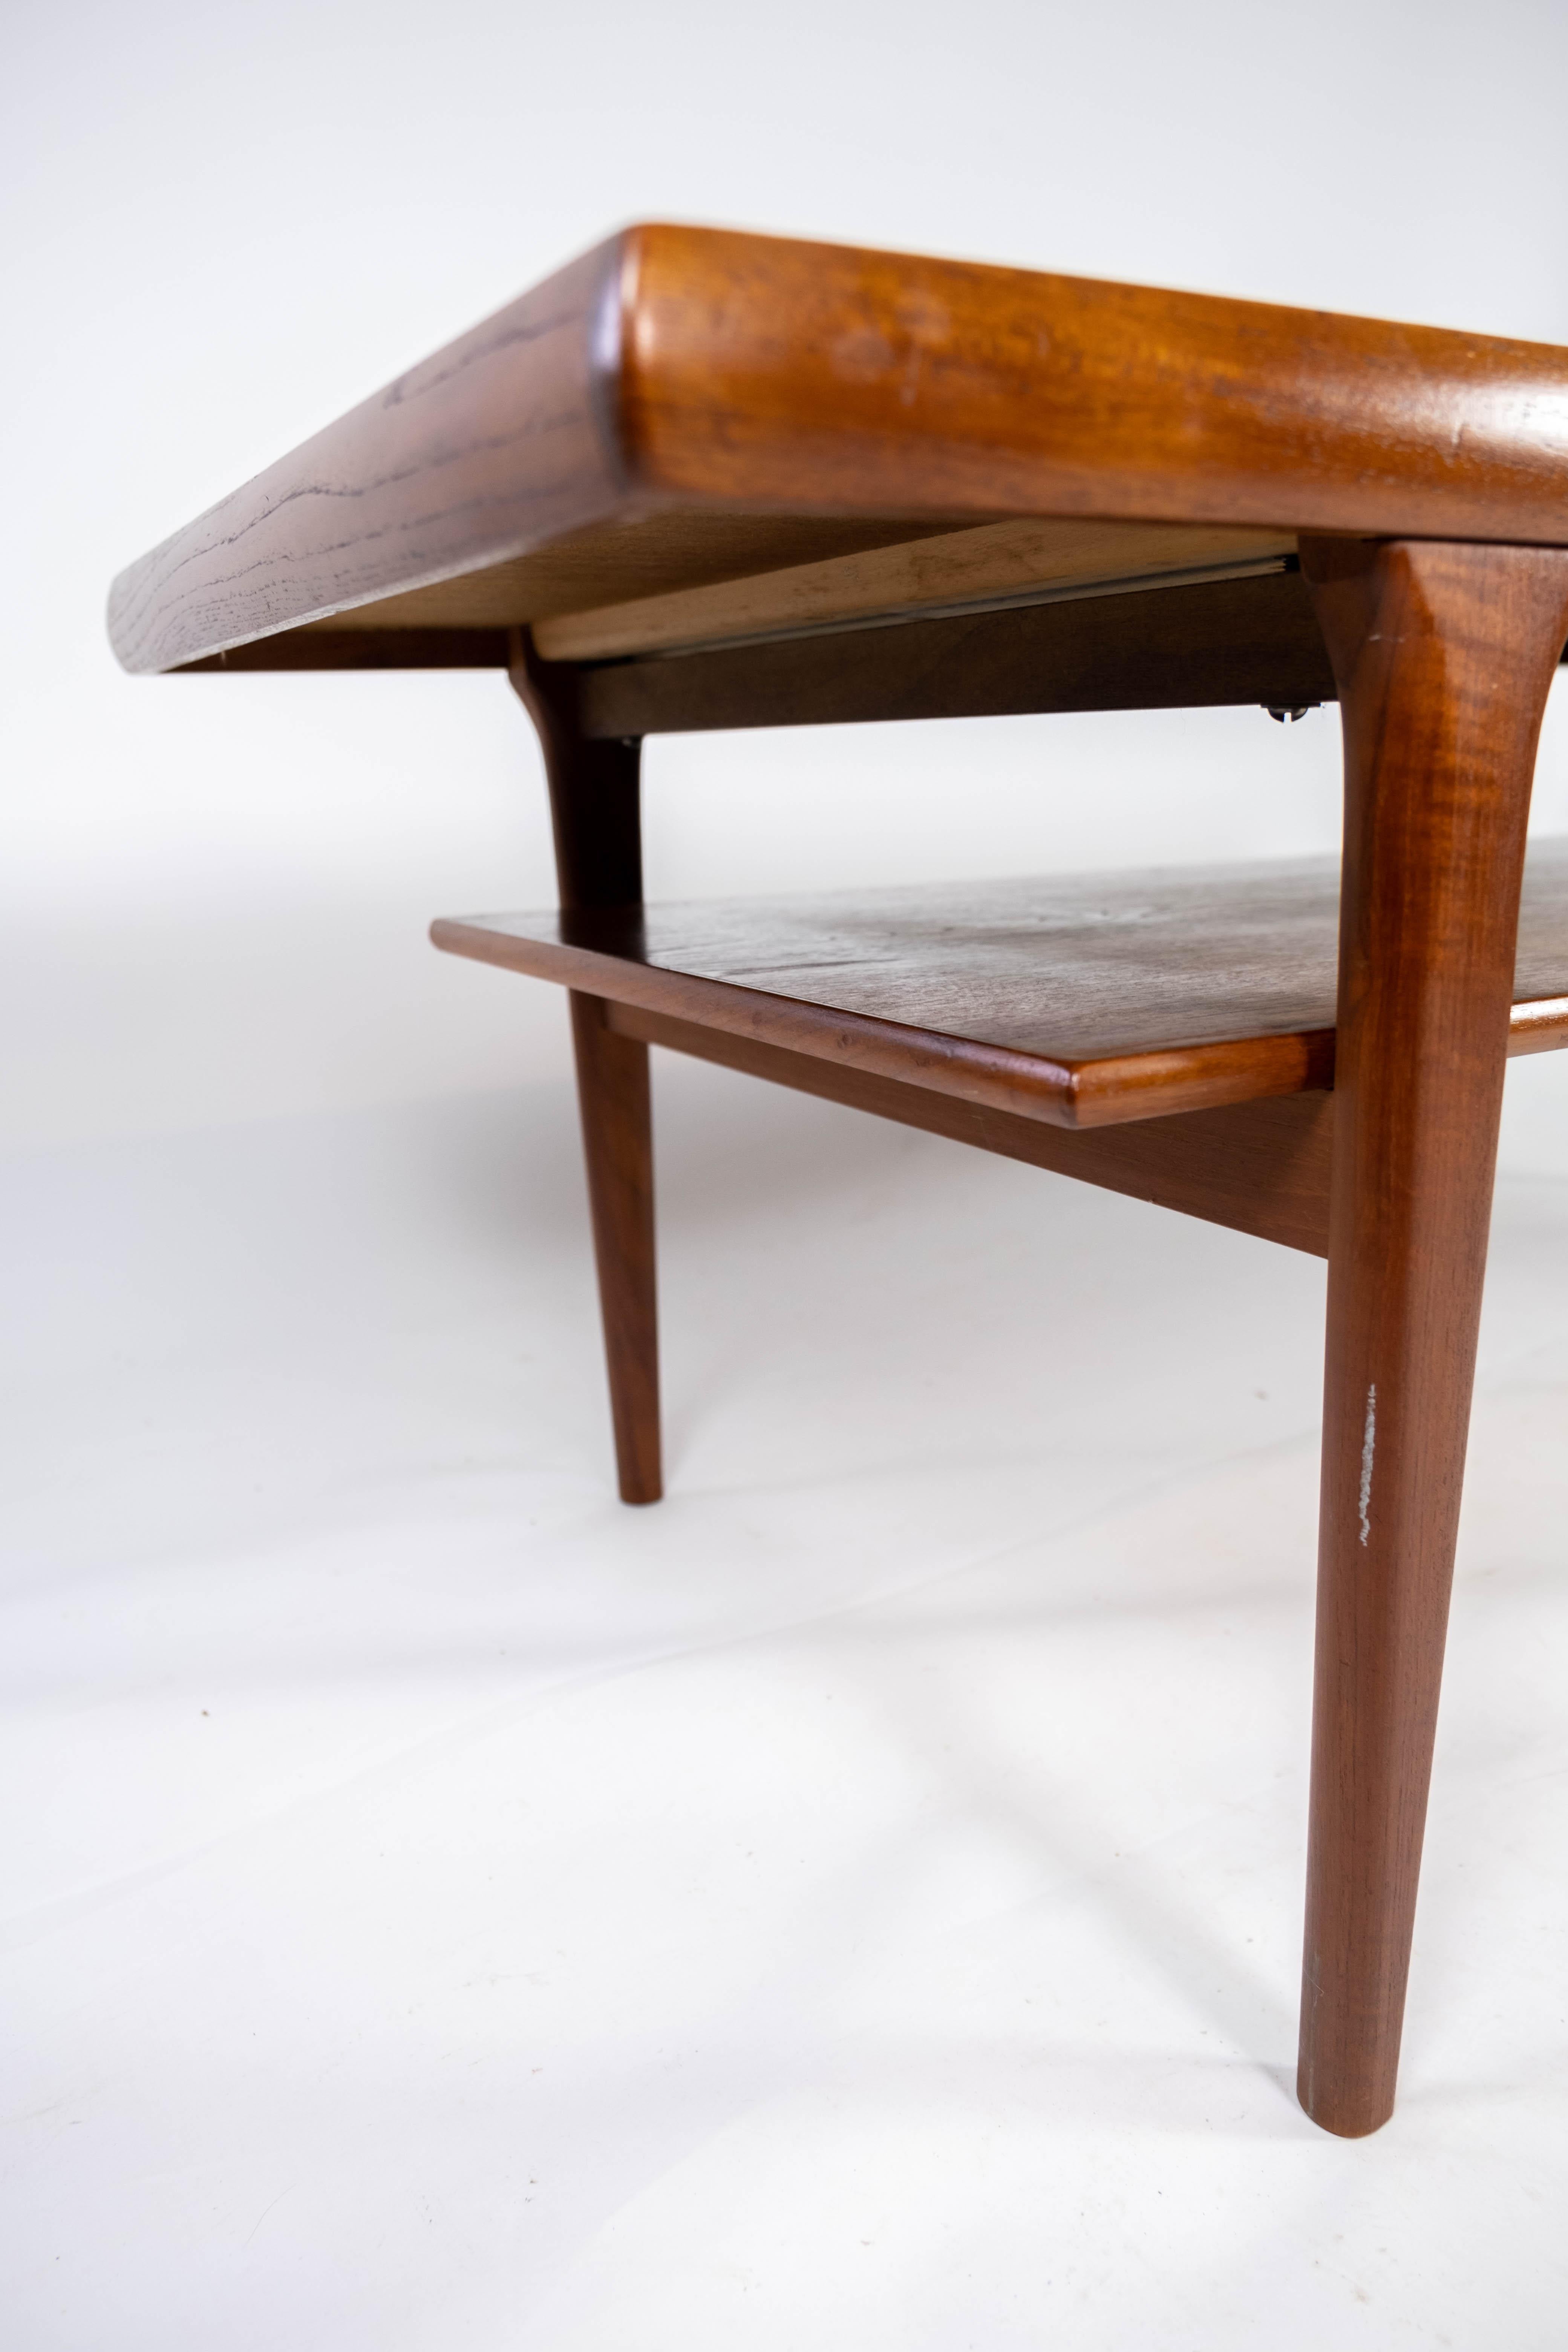 Mid-20th Century Coffee Table with Shelf in Teak of Danish Design from the 1960s